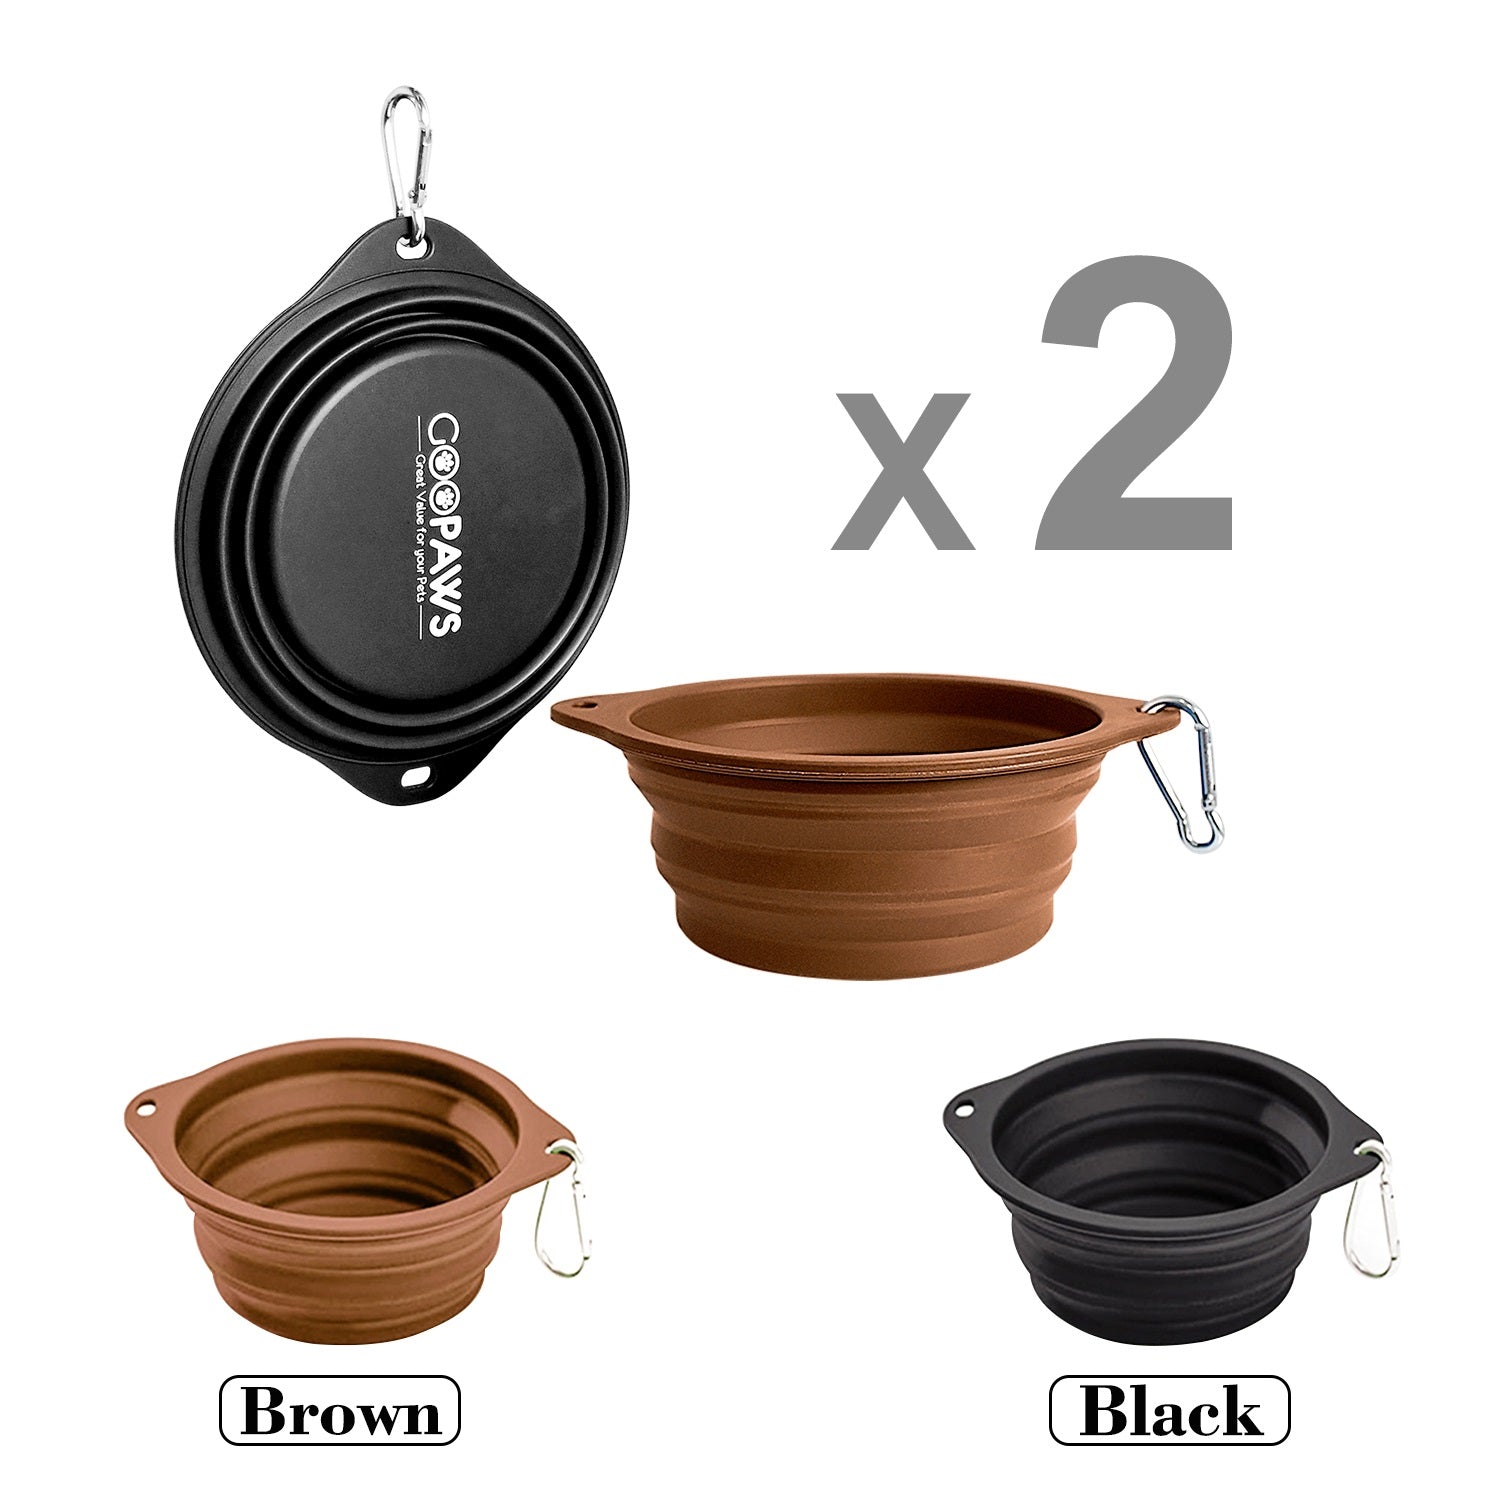 GOOPAWS 2 Pack Silicone Non-Skid Travel Dog and Cat Bowl, Black&Brown